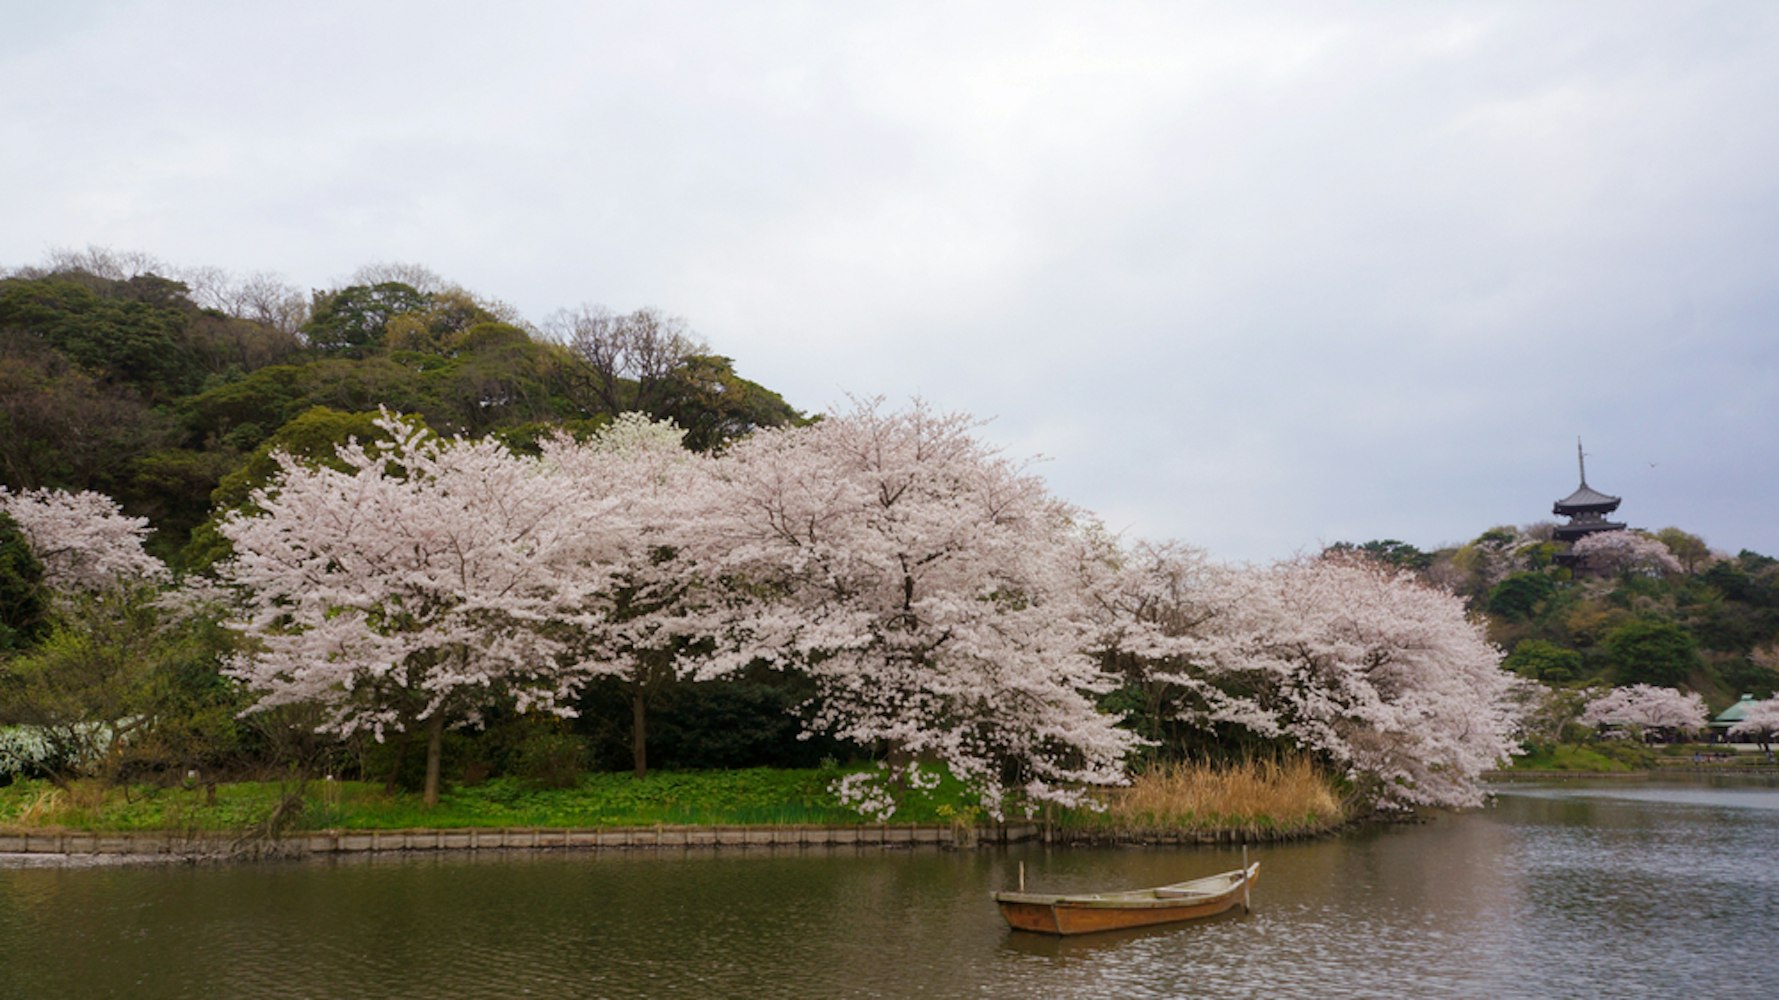 Sankeien, a traditional and typical Japanese-style garden, is one of the best places in Yokohama to enjoy sakura